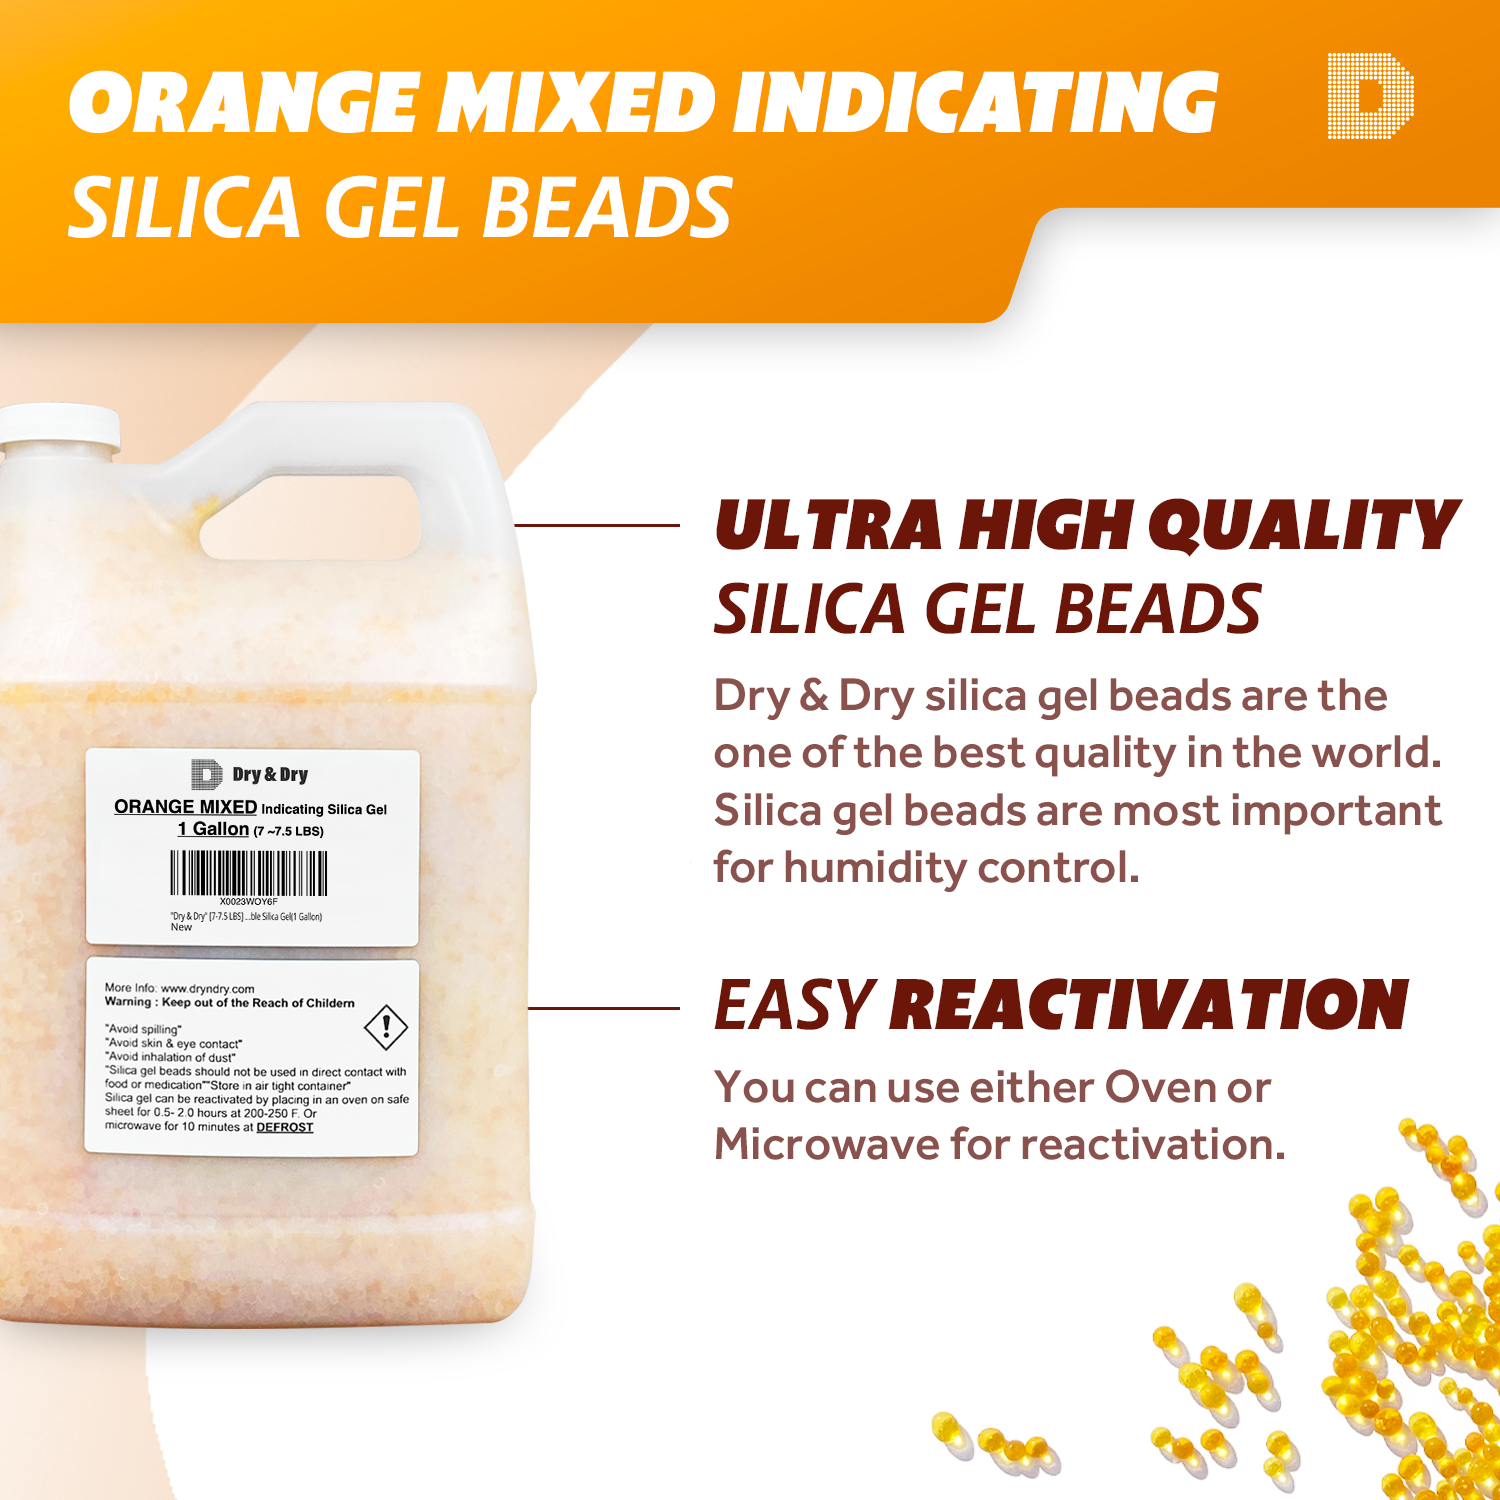 Dry & Dry Premium Orange Indicating Silica Gel for Flower Drying Desiccant  - (Net 3 LBS)